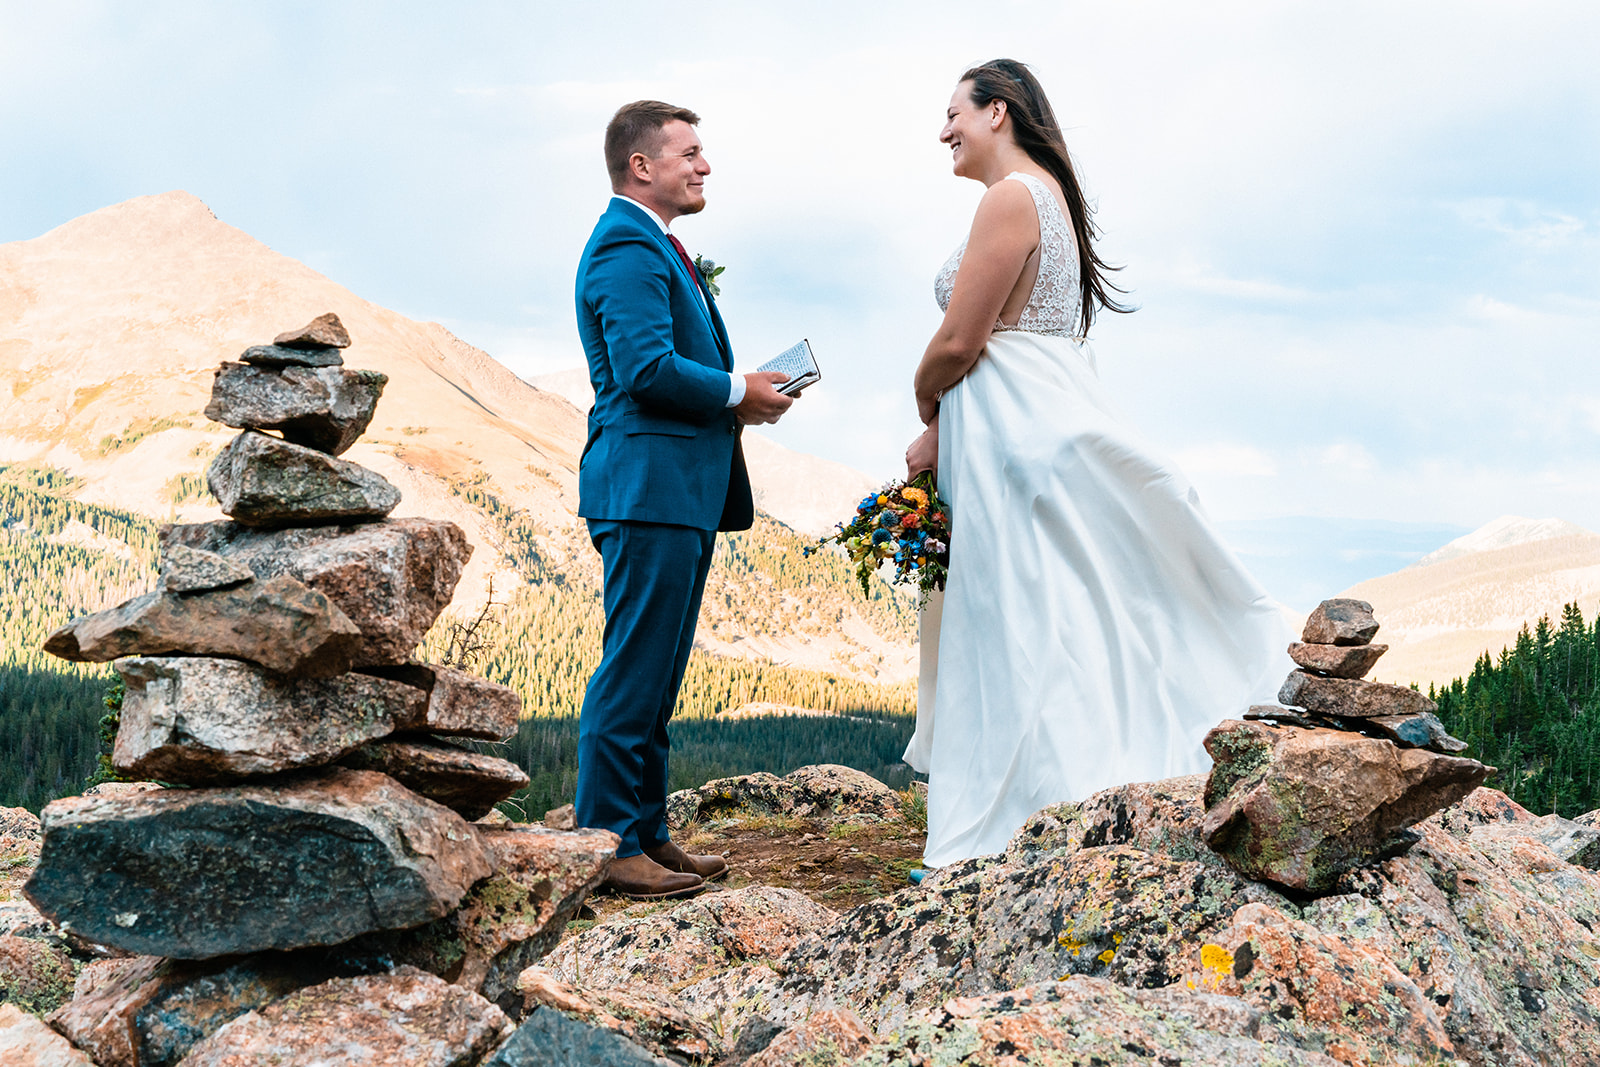 Bride and groom exchanging vows in the Colorado mountains